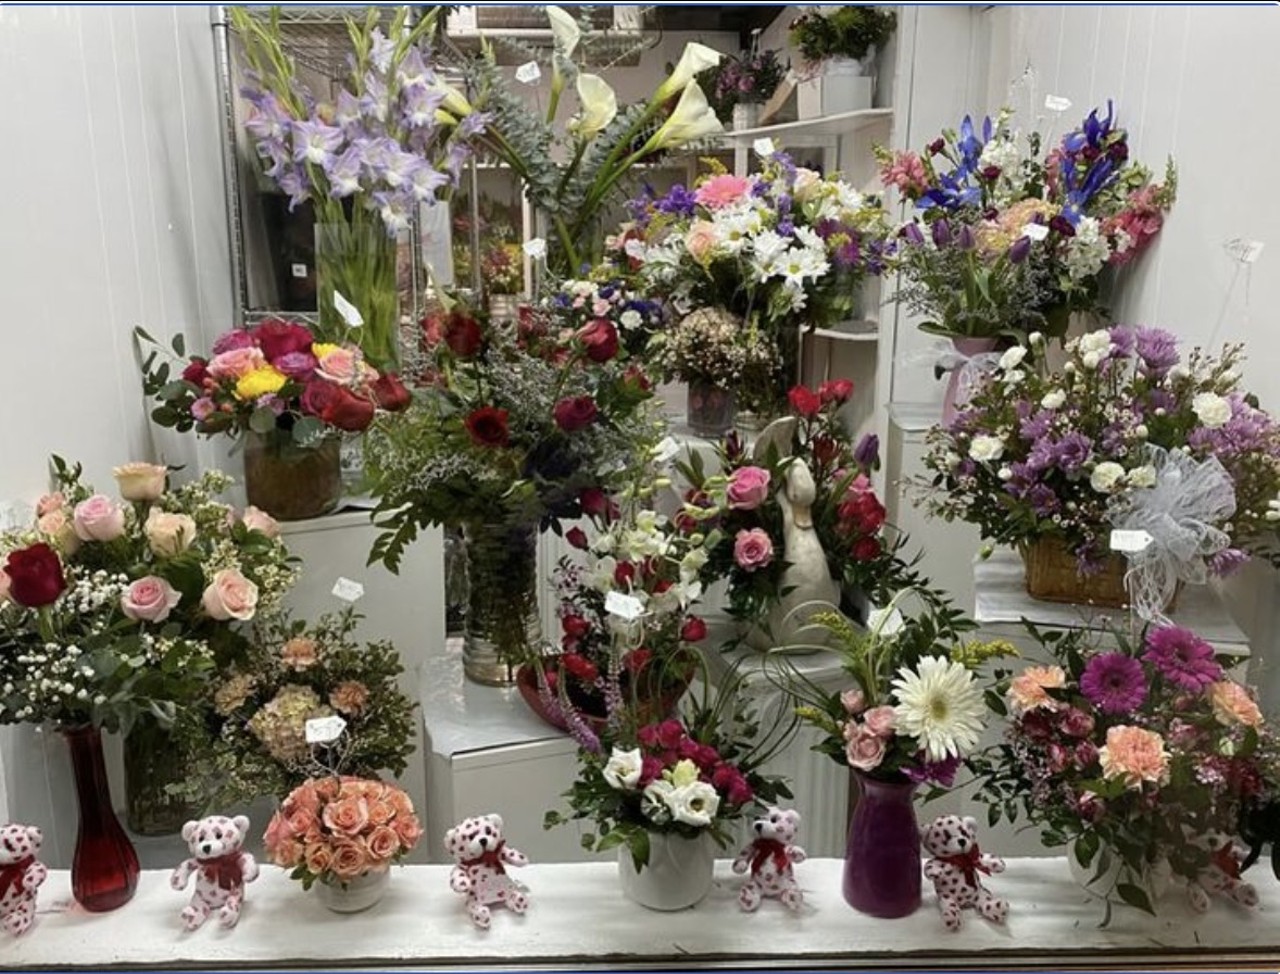 14. Nance Floral Shoppe  
624 E. Spring Street, New Albany, IN
Nance Floral Shoppe has been a staple Southern Indiana florist around for over 100 years. They offer delivery to surrounding areas, including Louisville, as well as an extensive line of florals, gifts and plants.